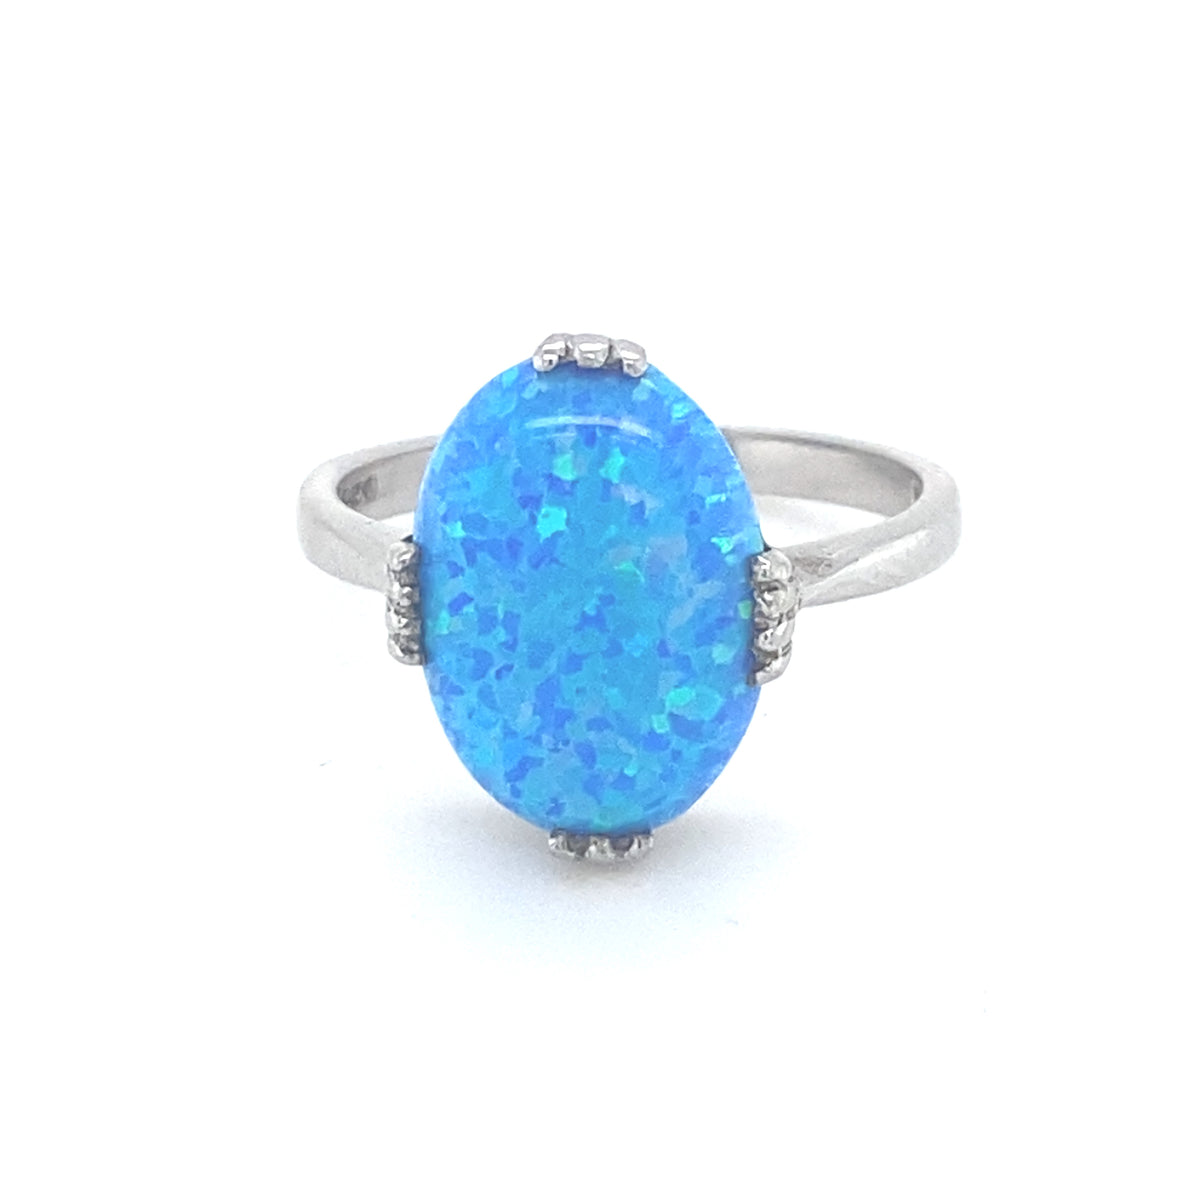 Sterling Silver Ring with the most Vibrant Blue Opal Style Stone